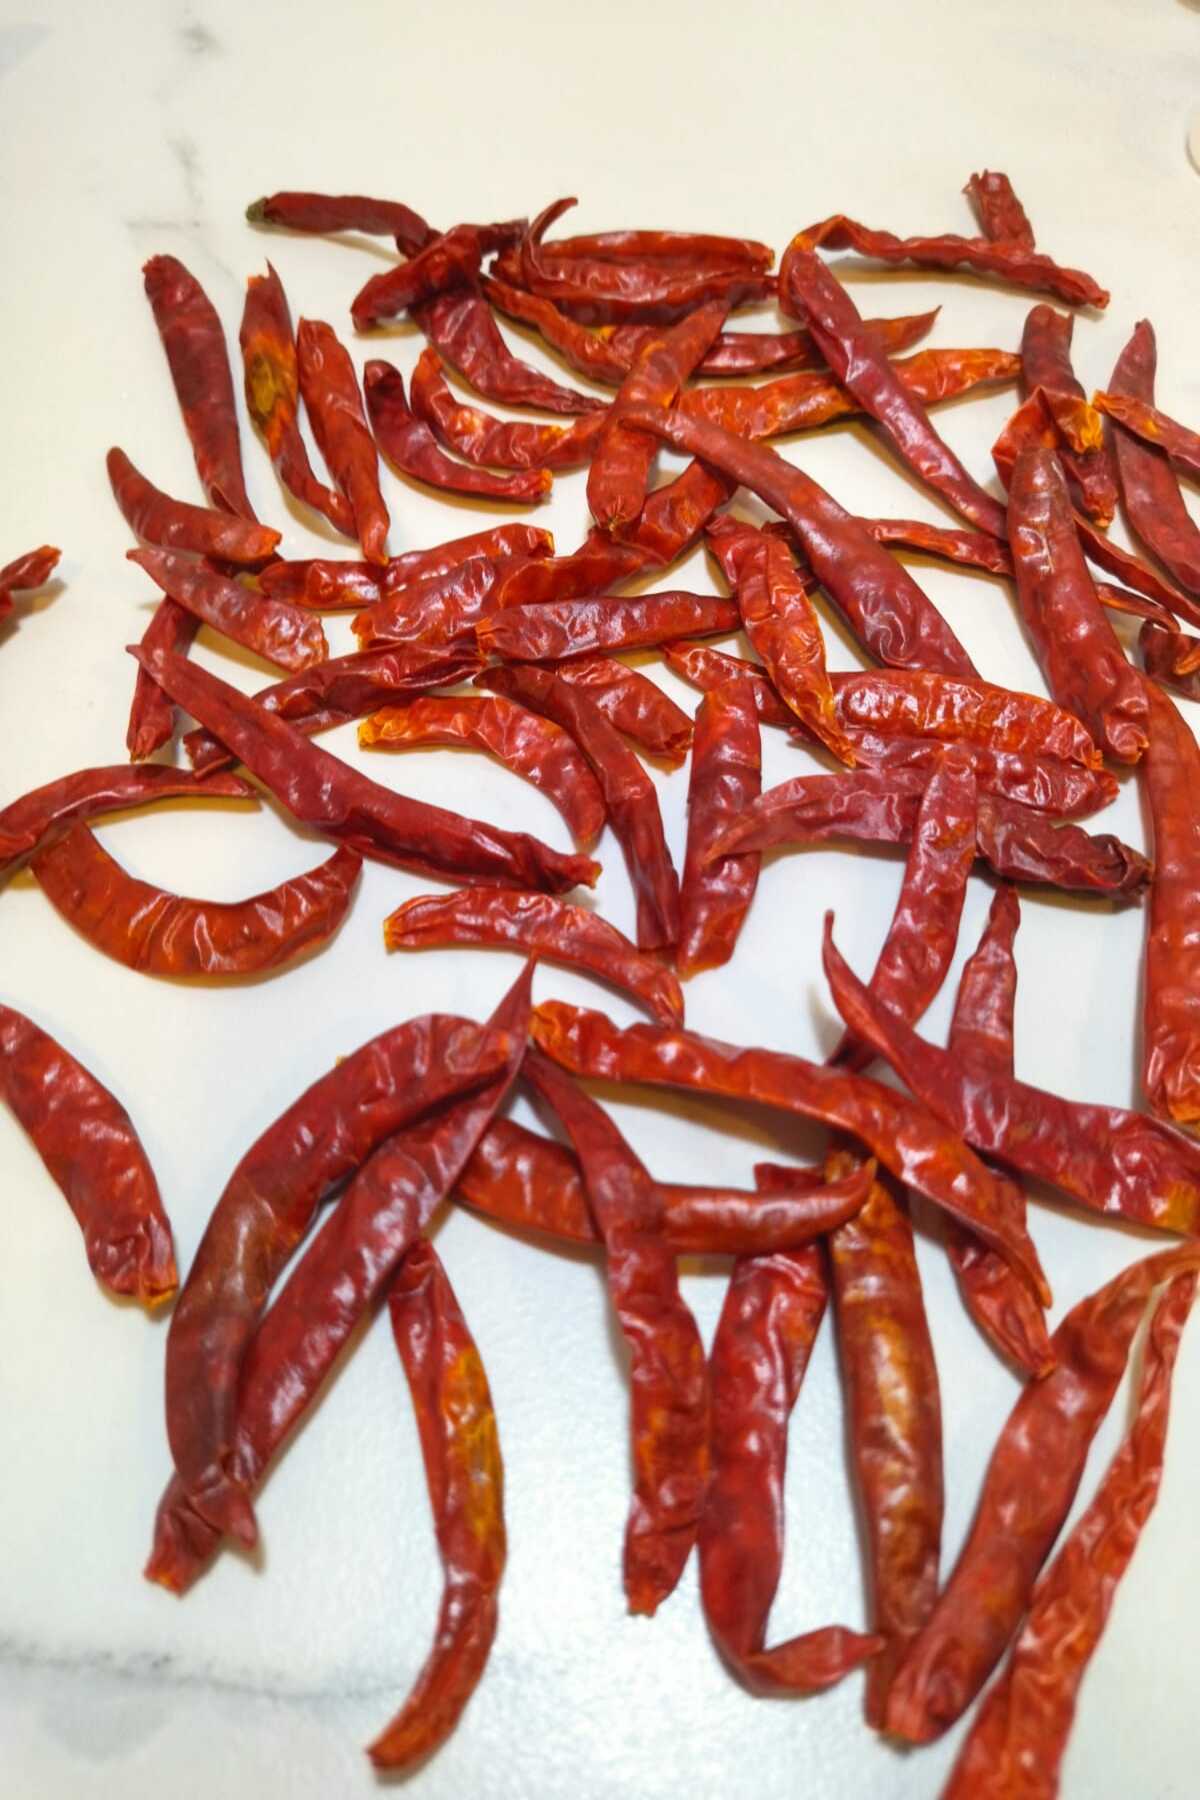 Spread-out chile de árbol on the counter.